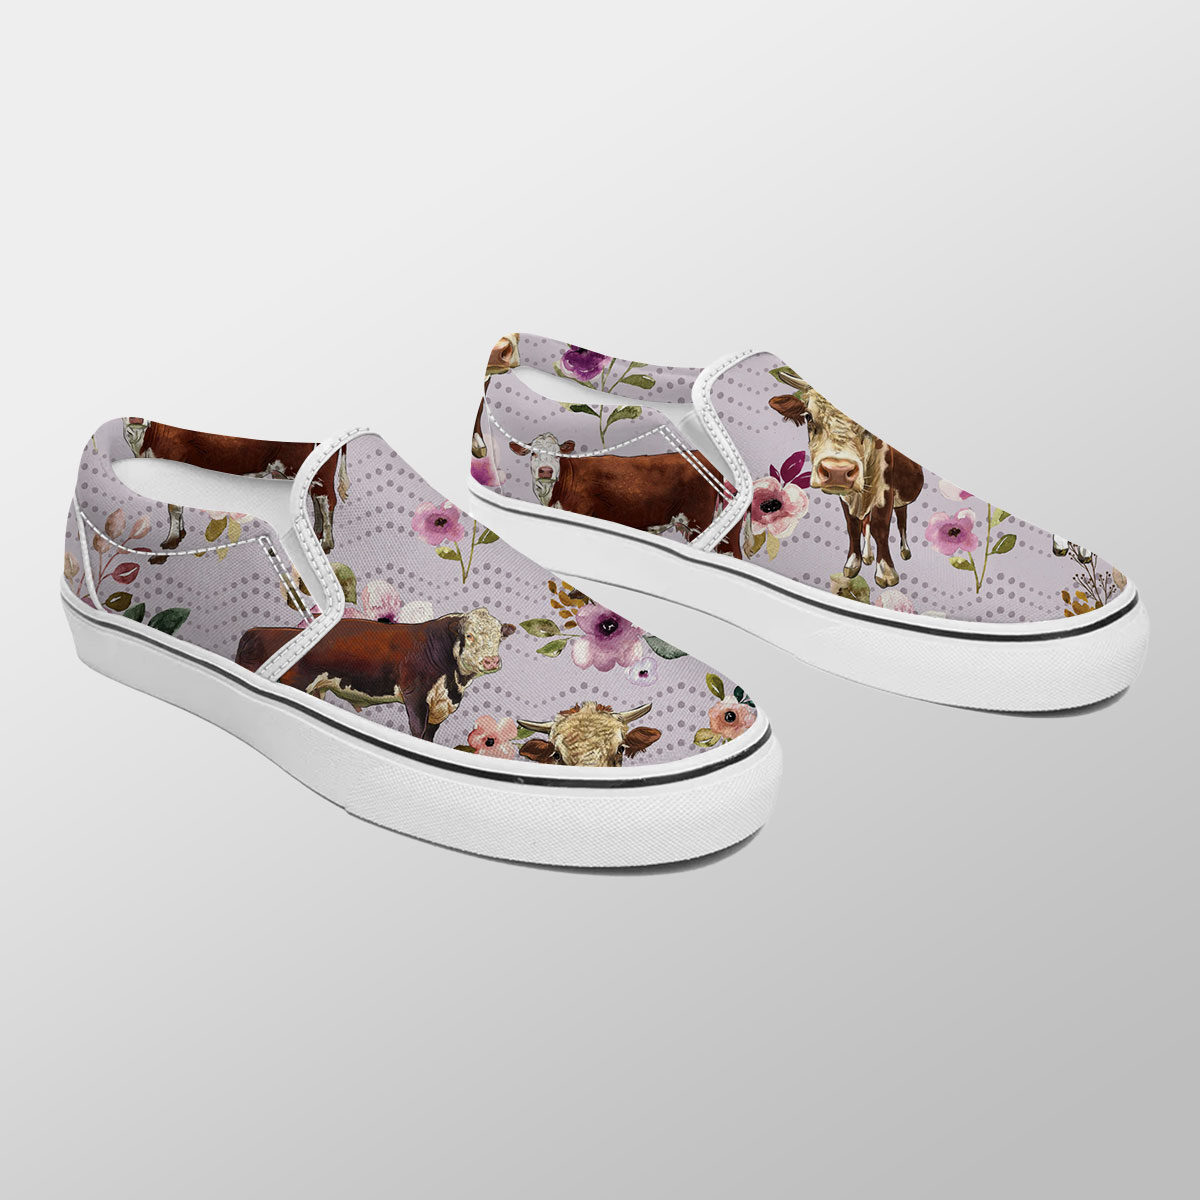 Hereford Autumn Amethyst Boho Floral Pattern Slip On Sneakers